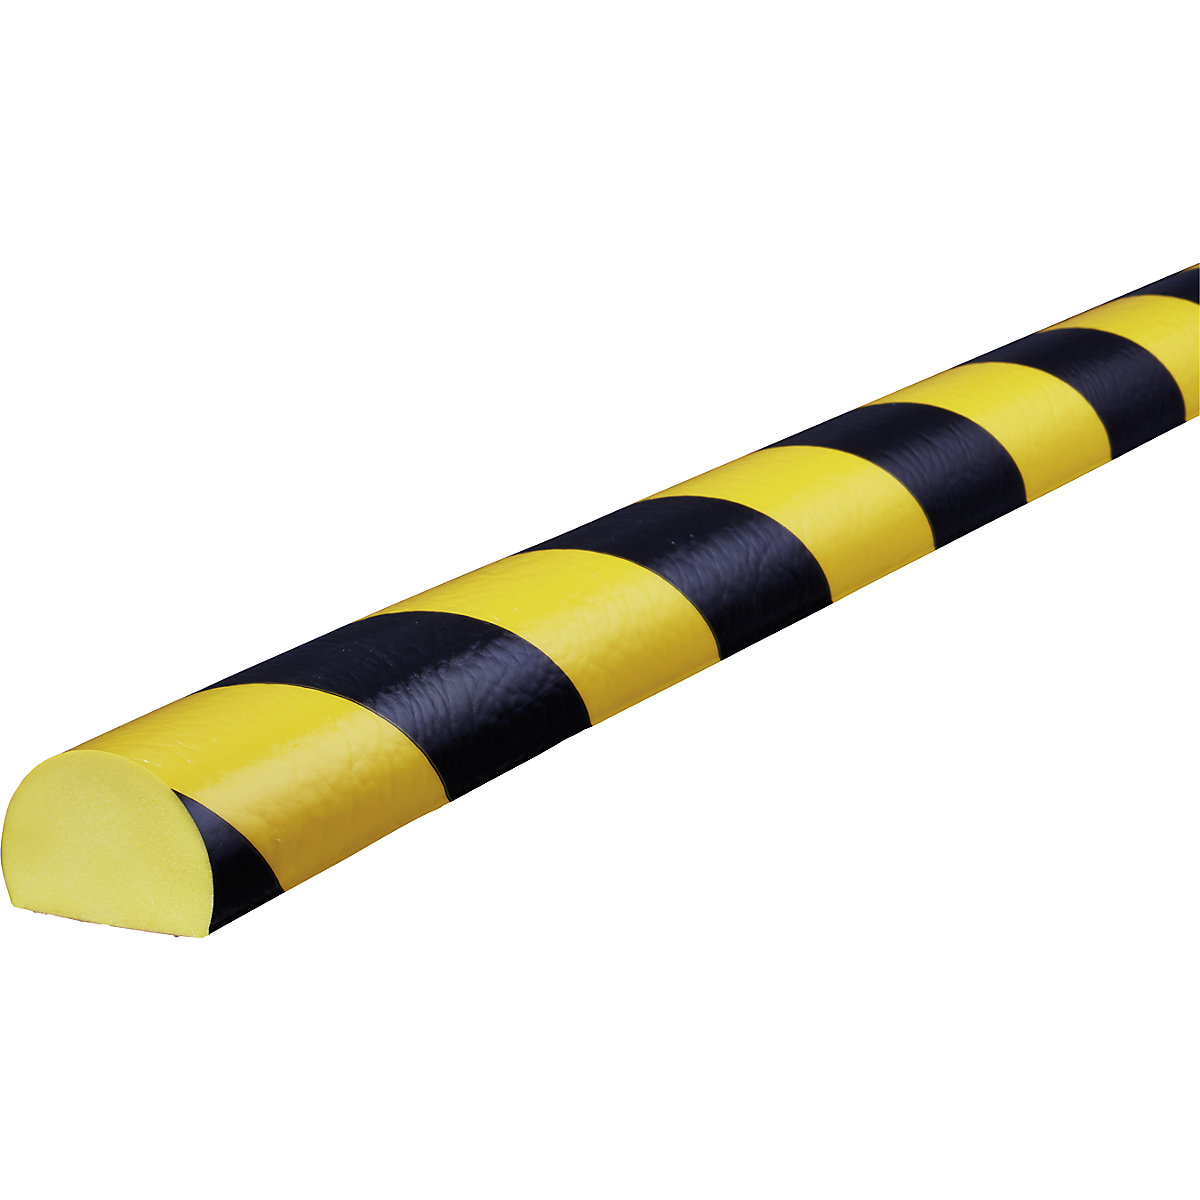 Knuffi® surface protection – SHG, type C, 1 x 5 m roll, black / yellow-24